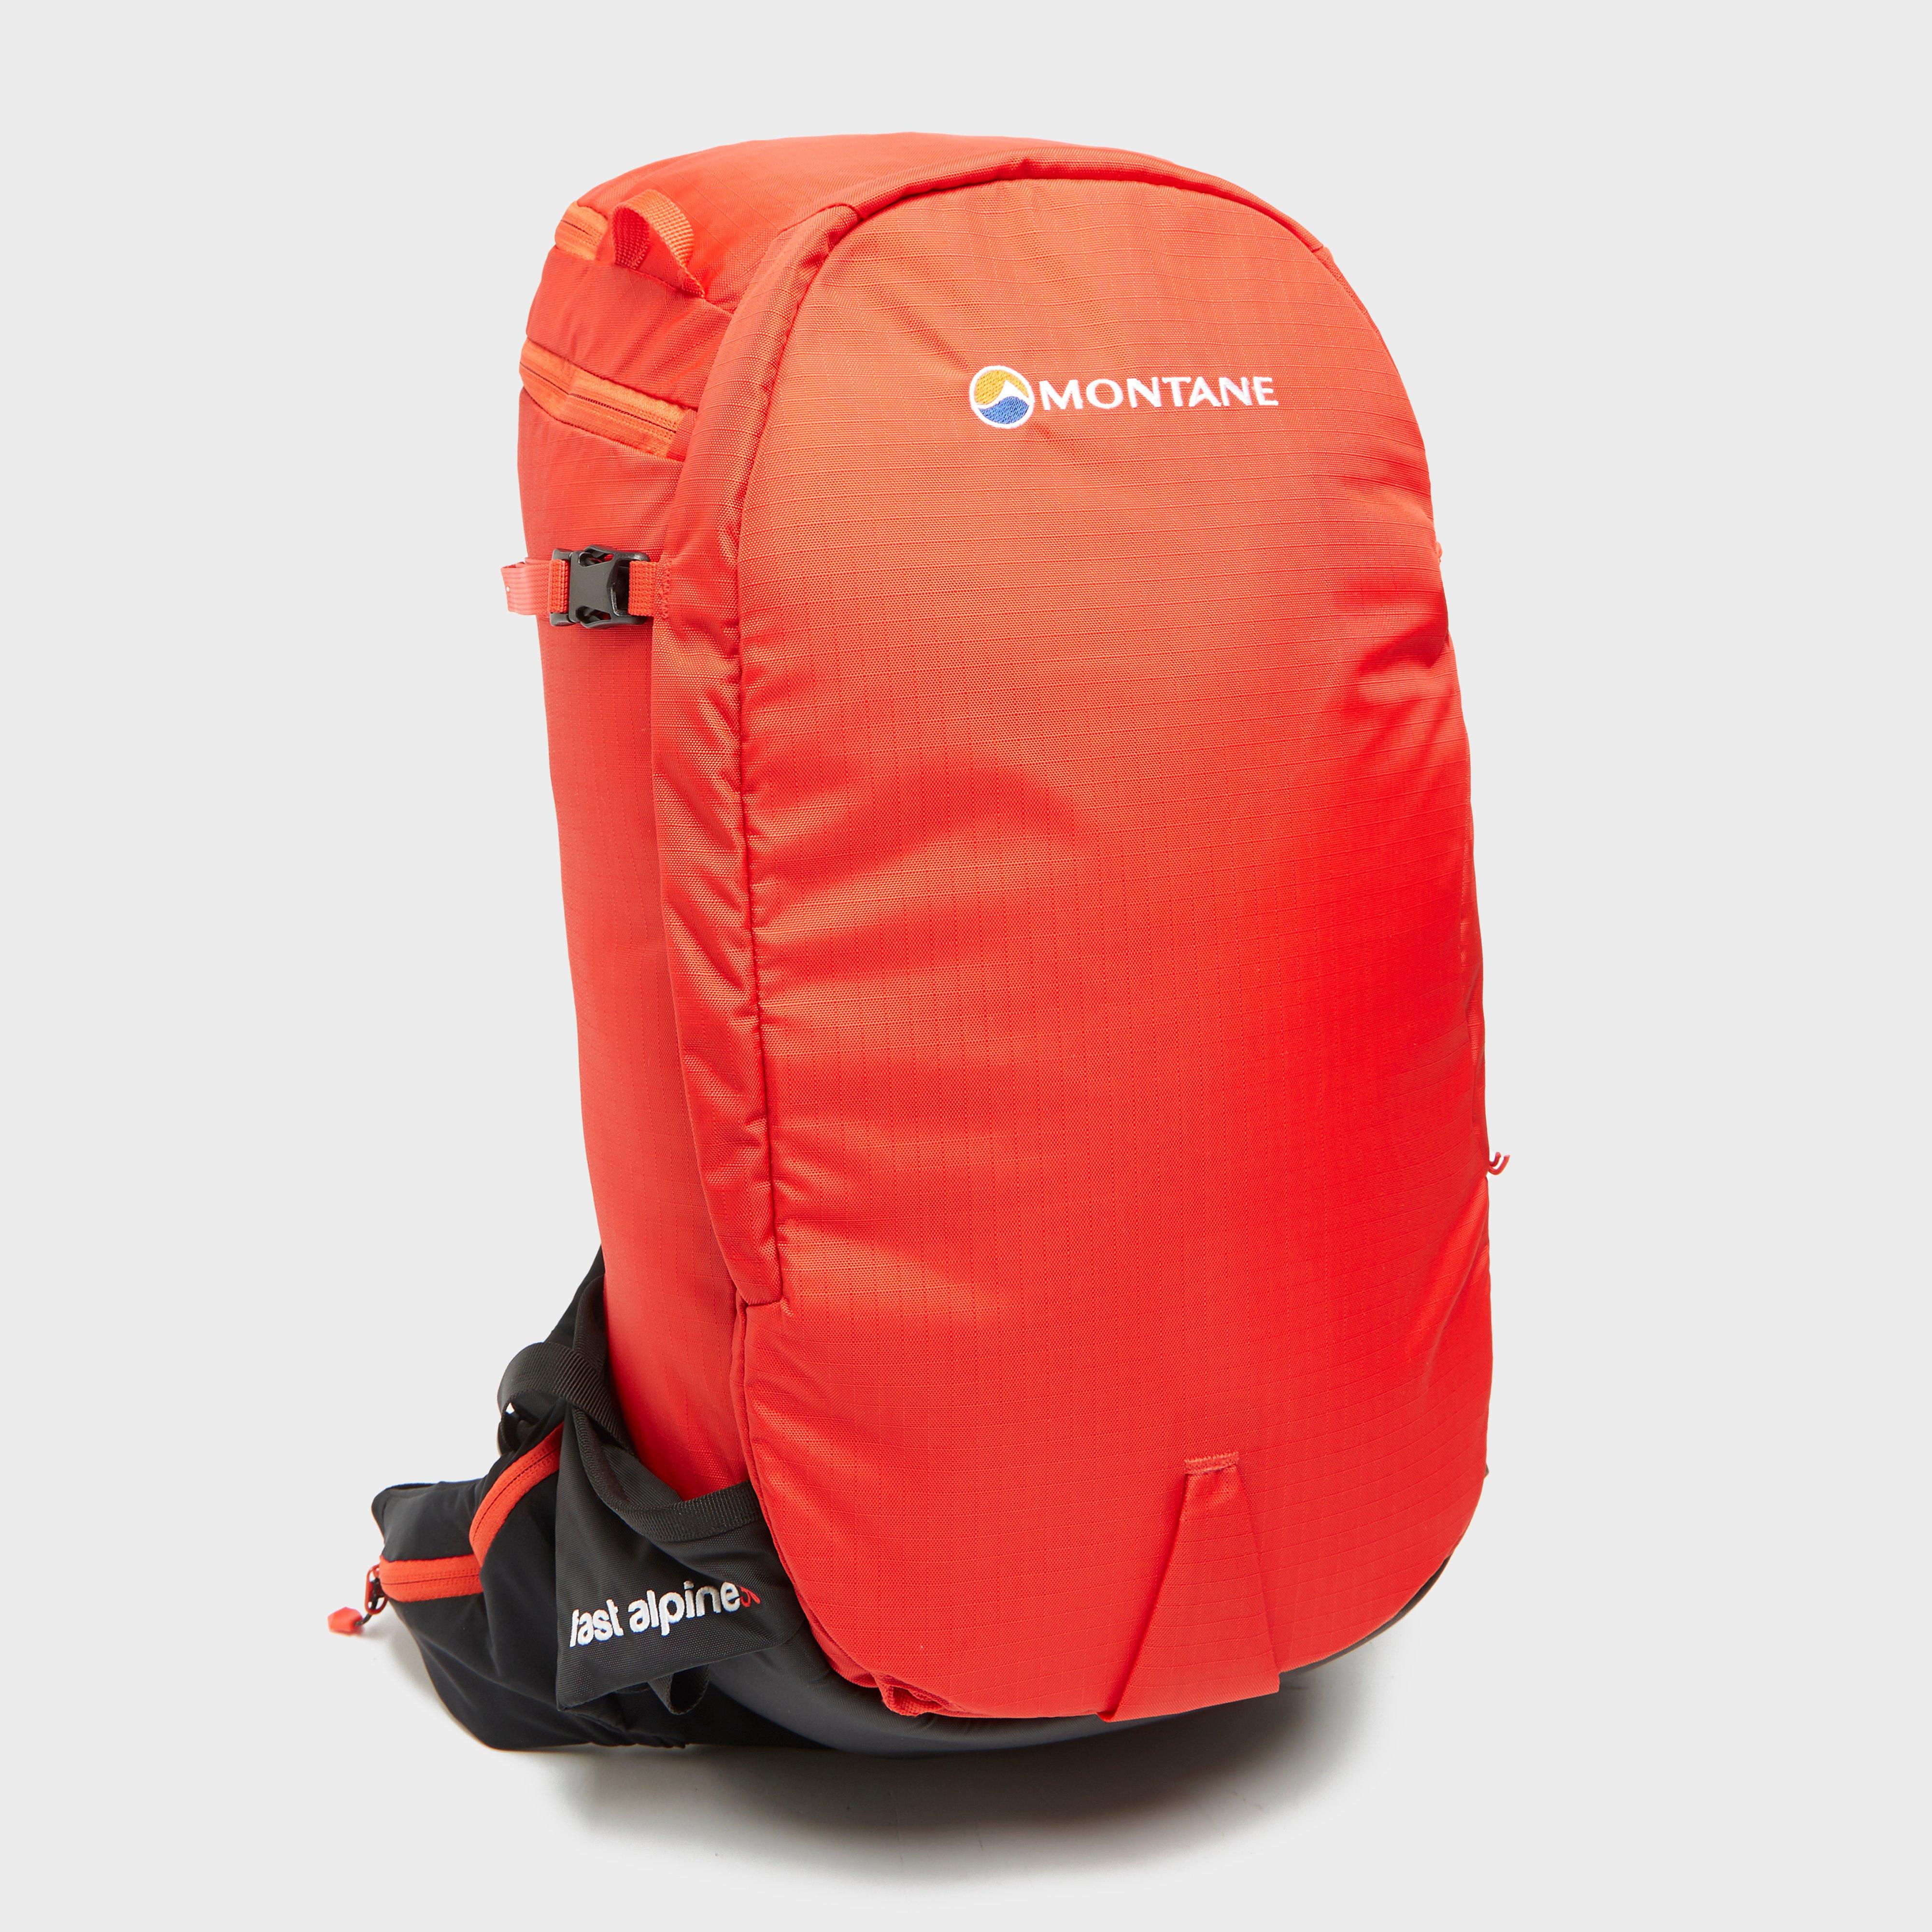 Montane Fast Alpine 30l Rucksack - Red/red  Red/red